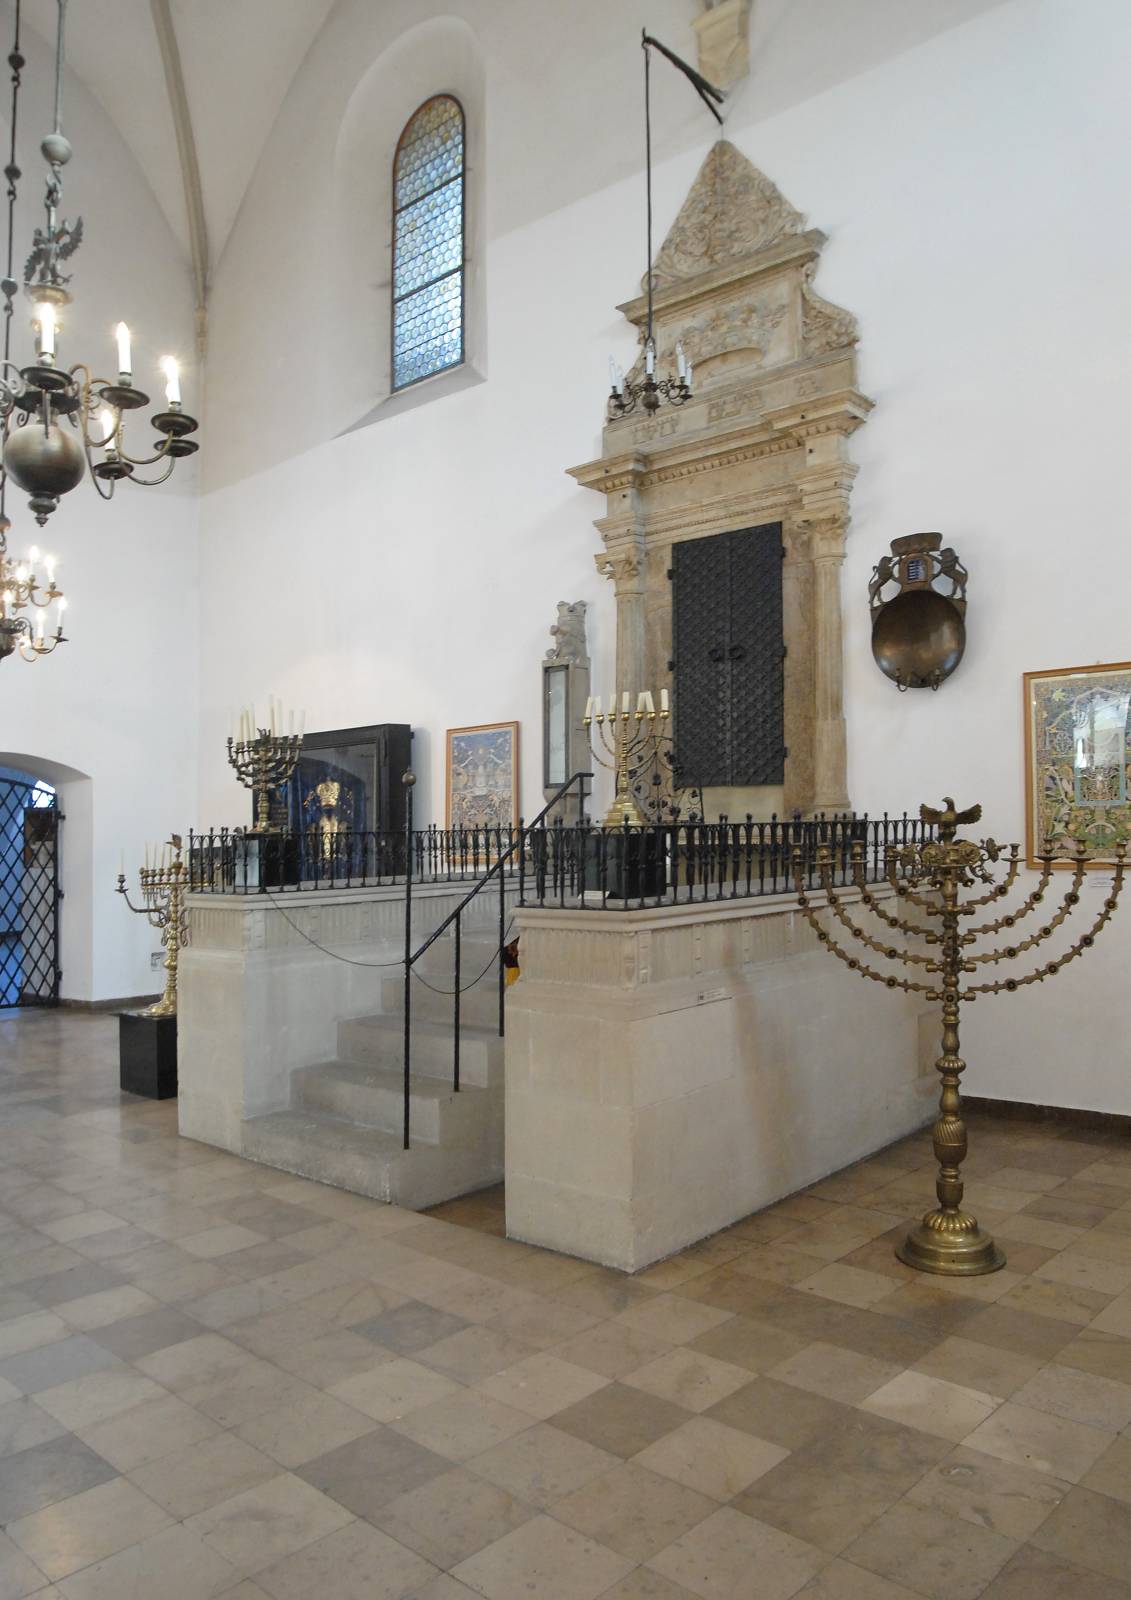 The history and Culture of Jews in Kraków